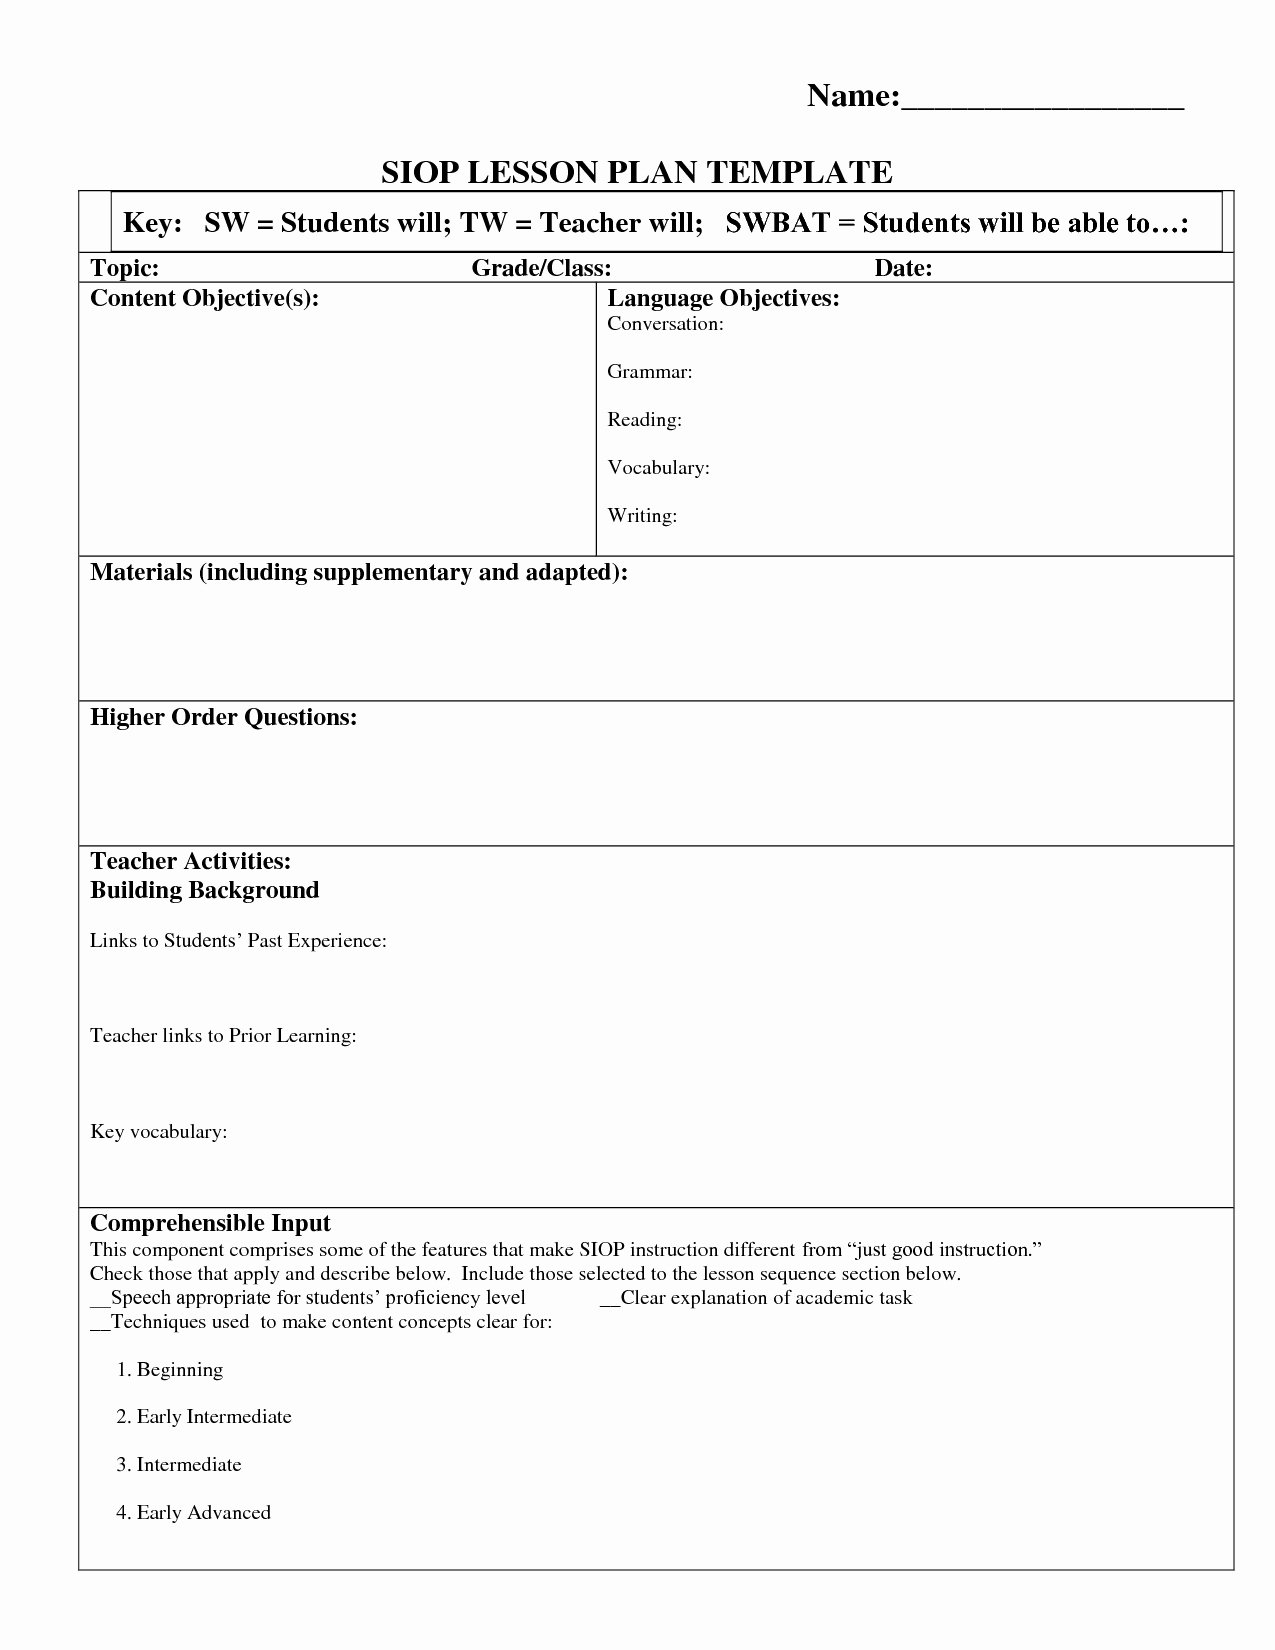 Siop Lesson Plan Template New Siop Lesson Plan Template